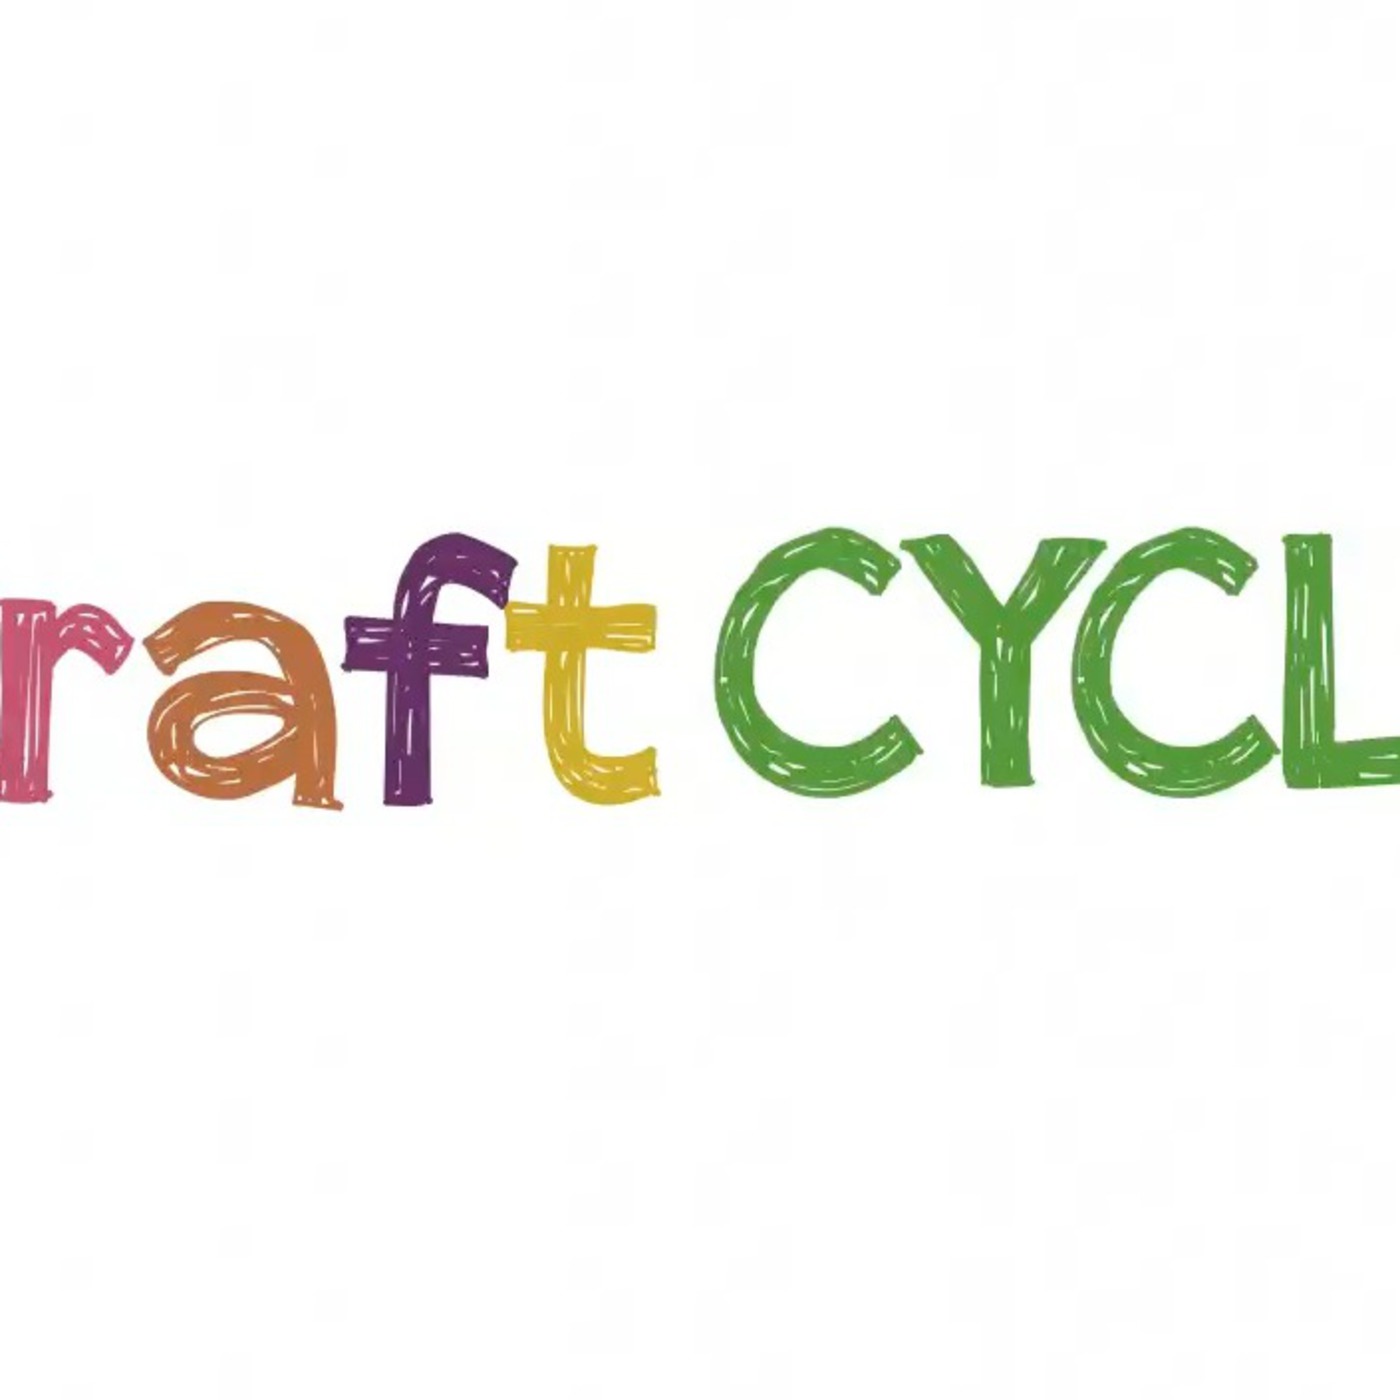 Craft Cycle